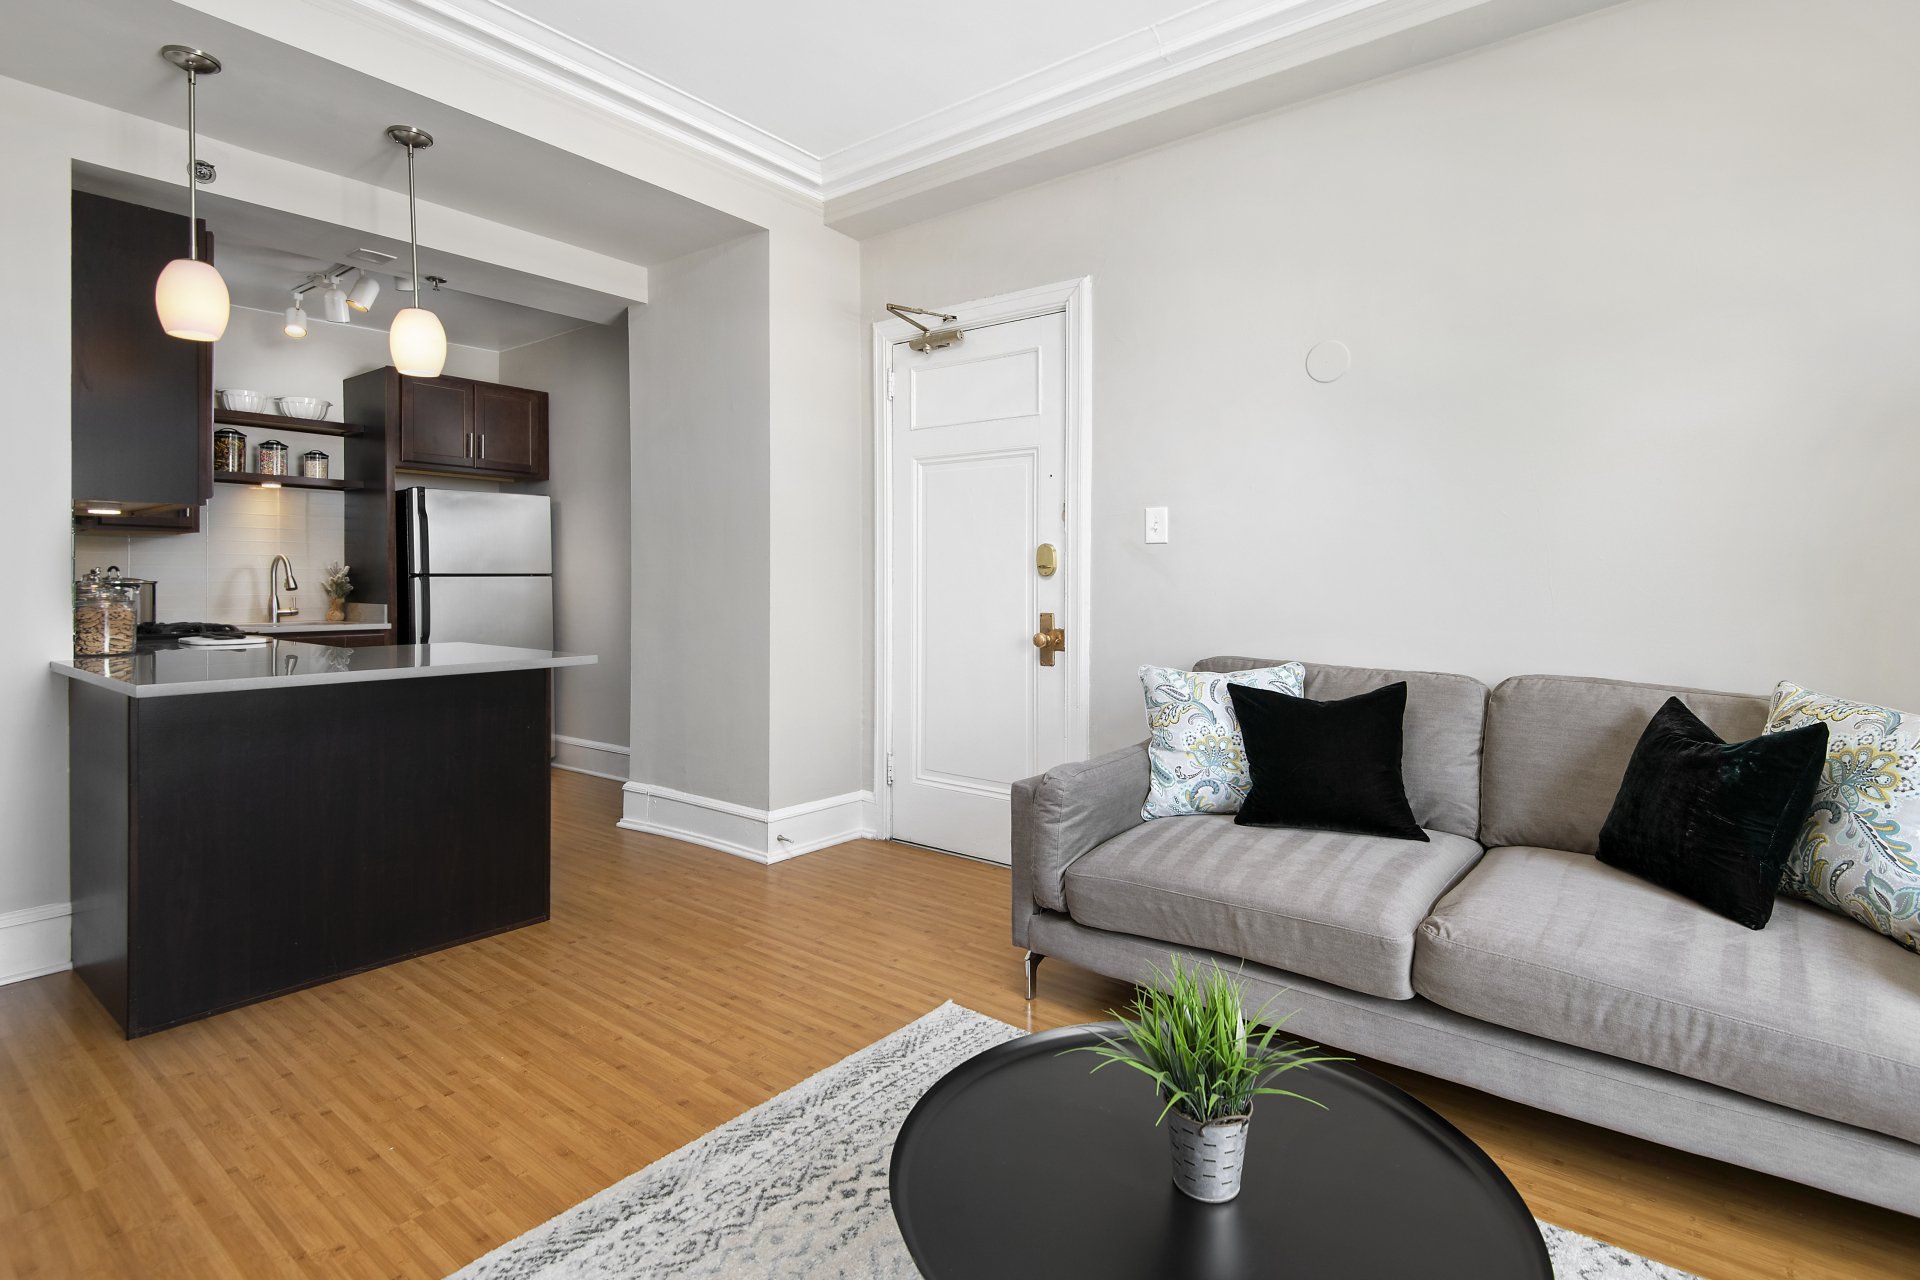 A living room with a couch, table, and kitchen in the background at The Belmont by Reside.